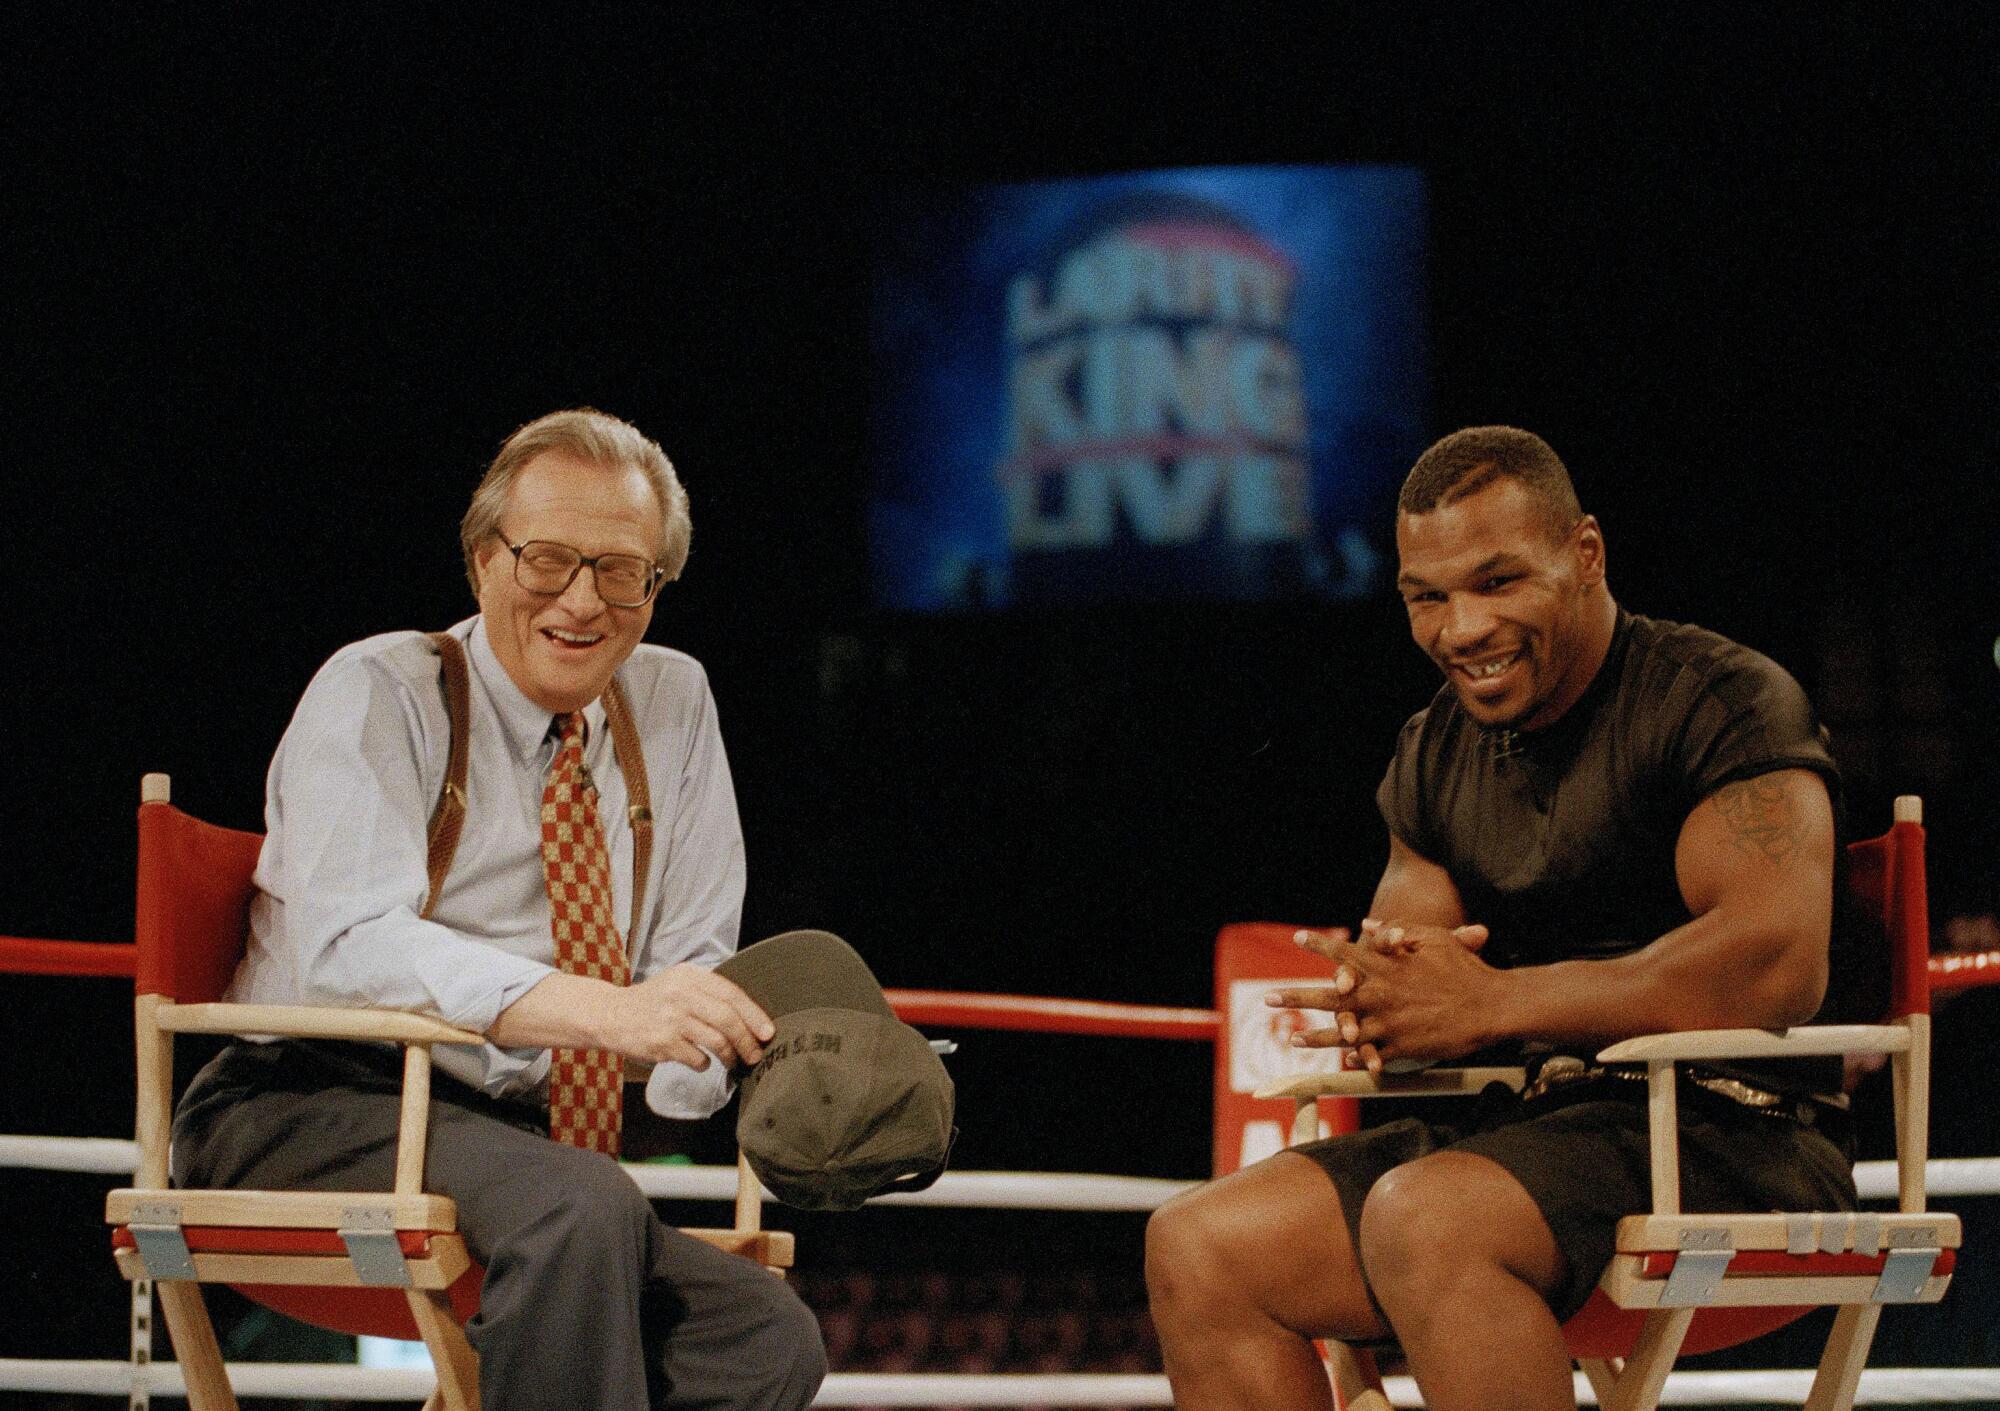 Larry King shares the ring with former heavyweight champion Mike Tyson, right, for an interview in 1999